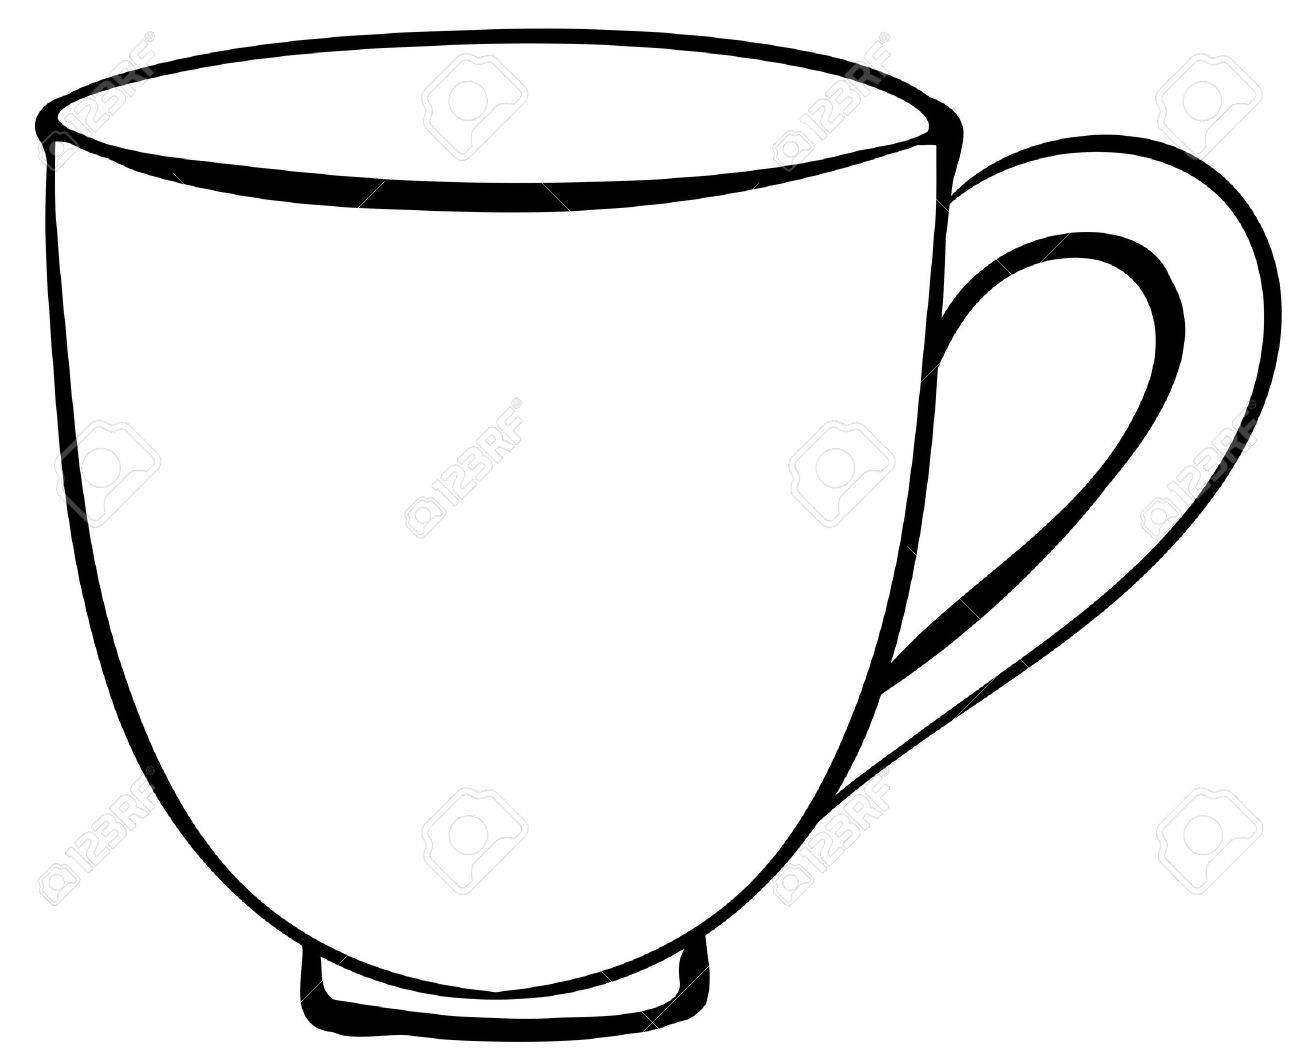 Cup Clipart outline